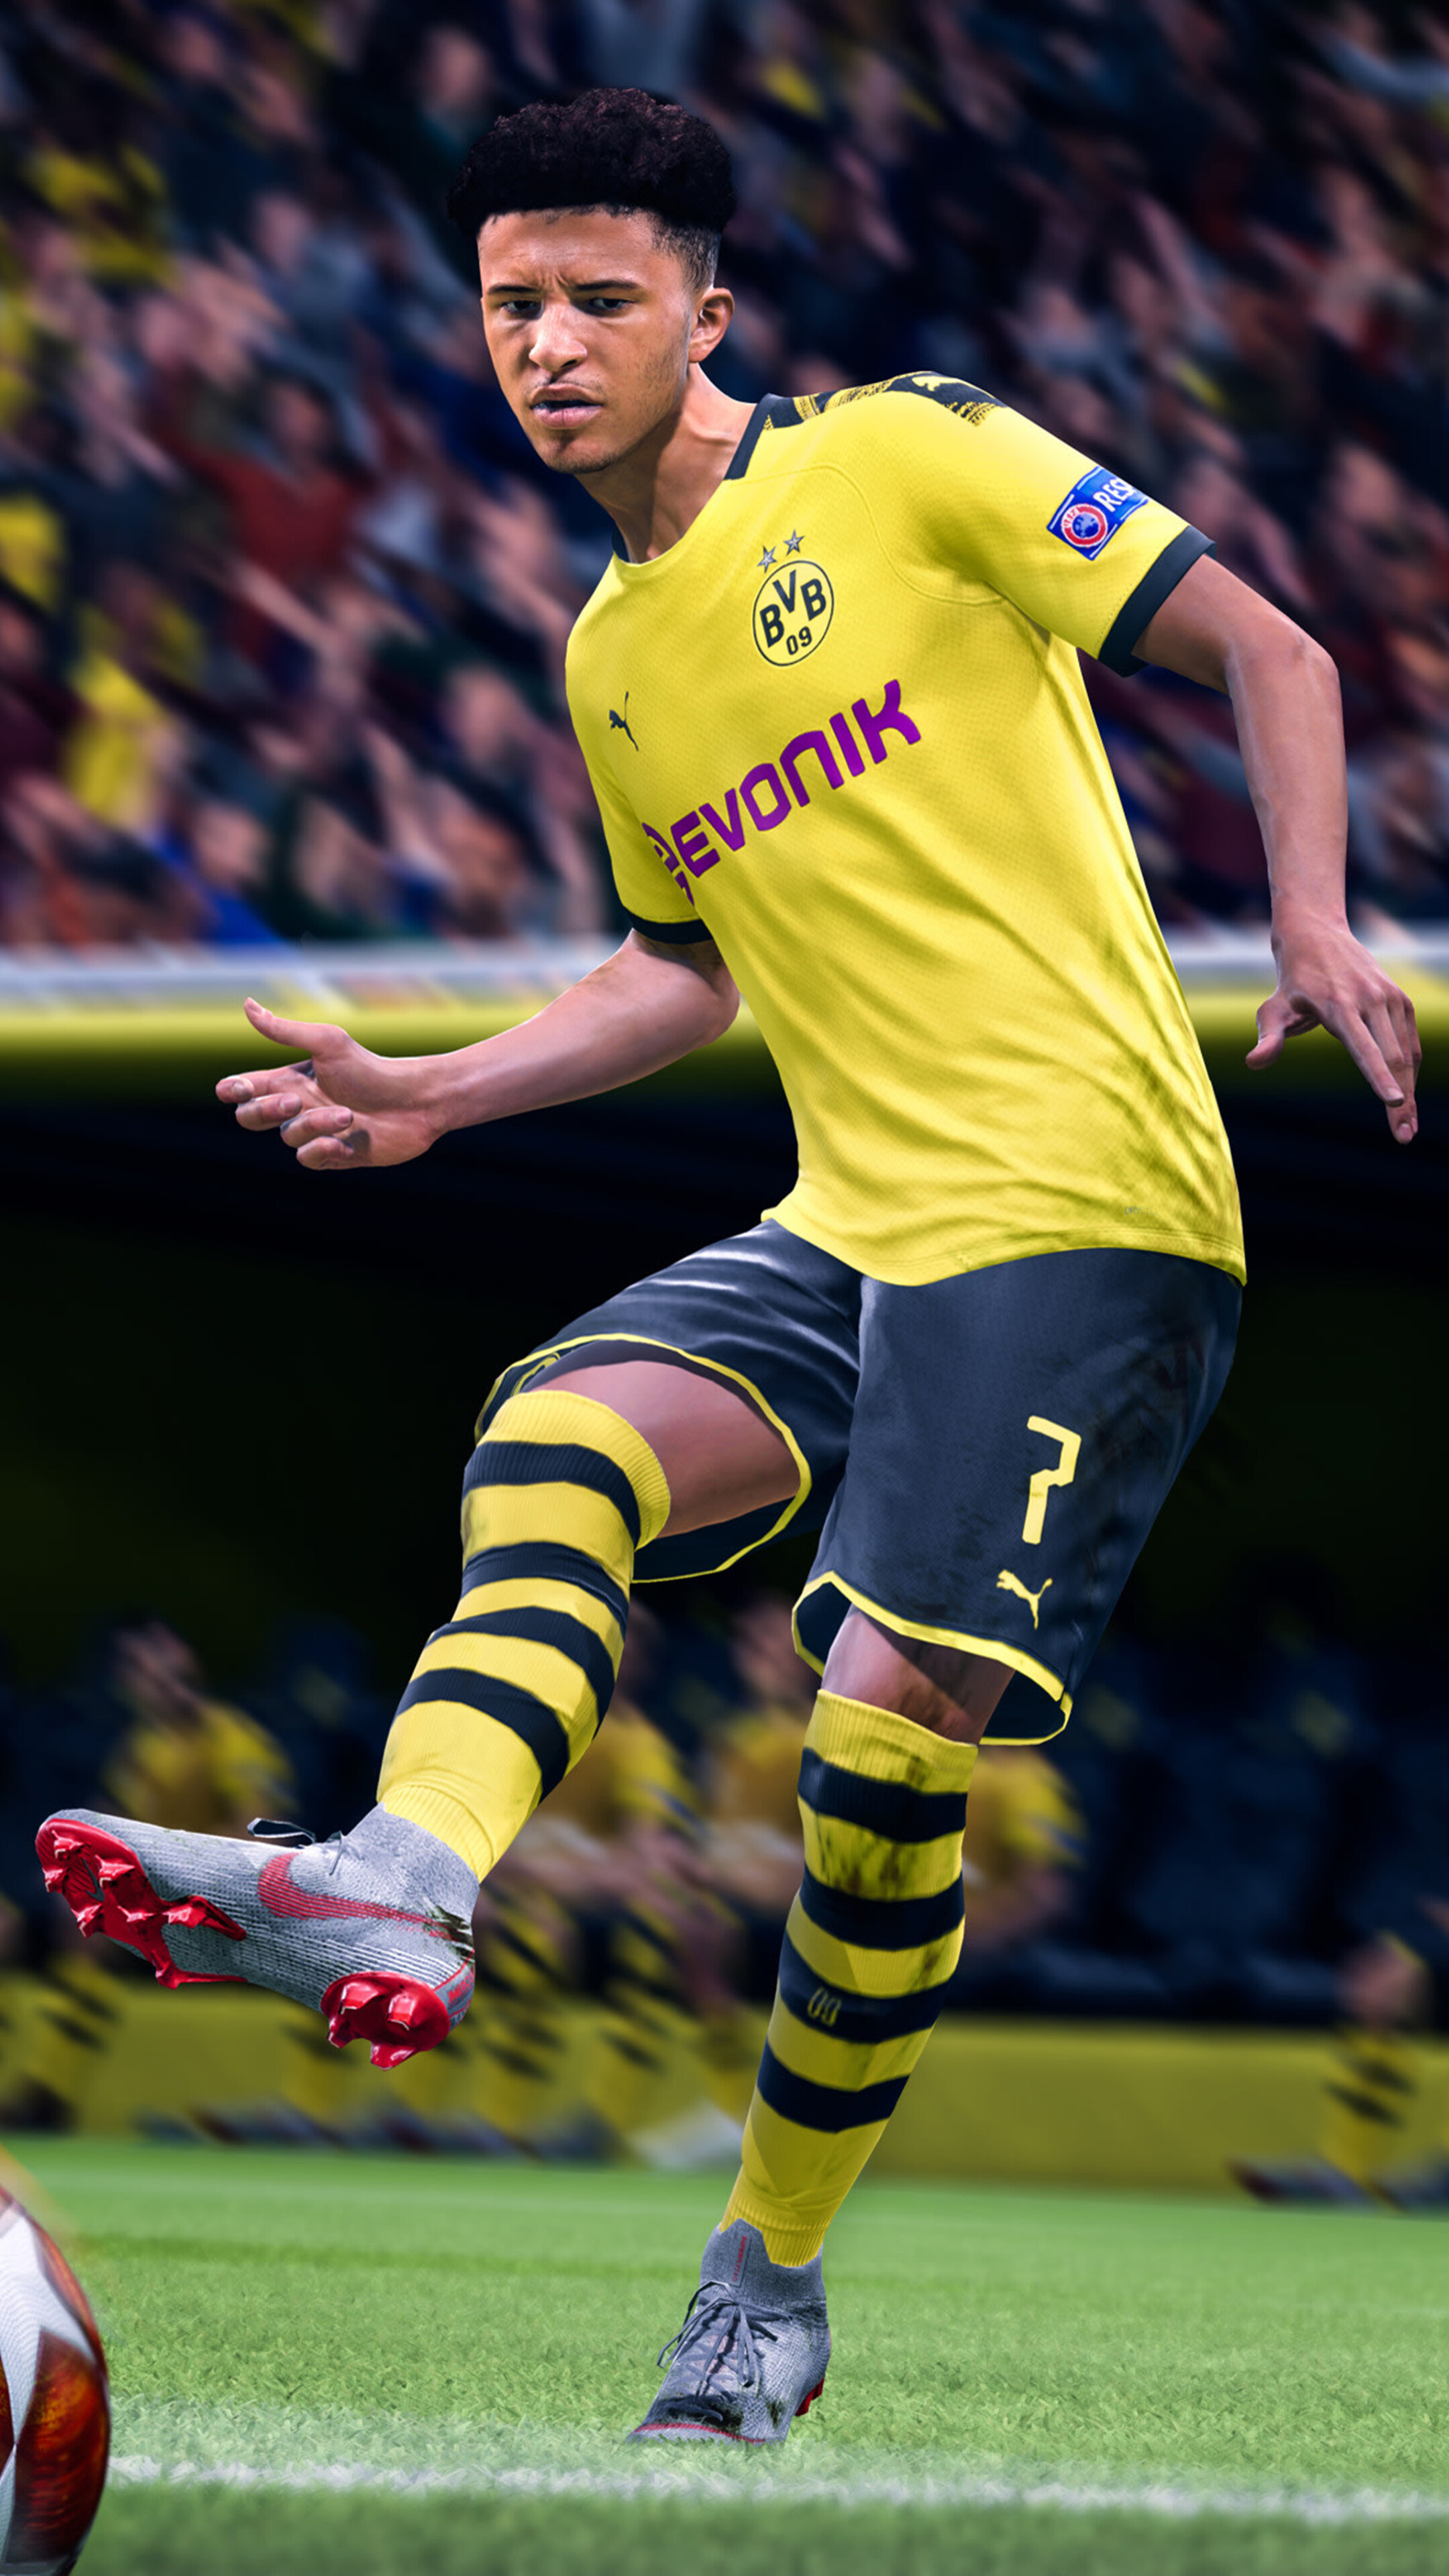 FIFA Soccer (Game): A football simulator developed under the EA Sports label, Player customization options. 2160x3840 4K Background.